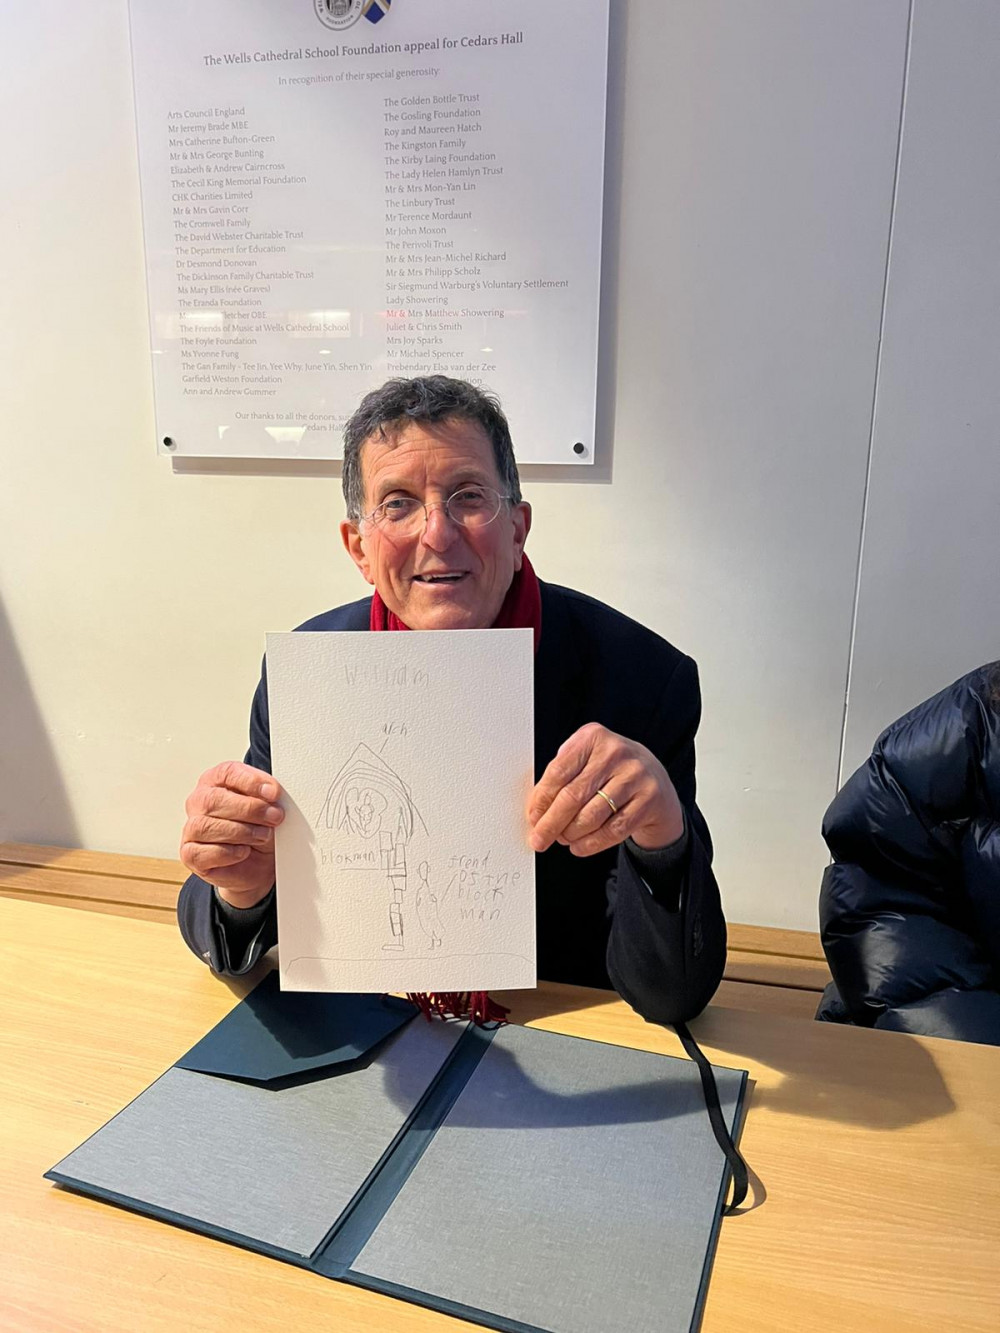 Antony Gormley with drawing by William du Plessis age 7